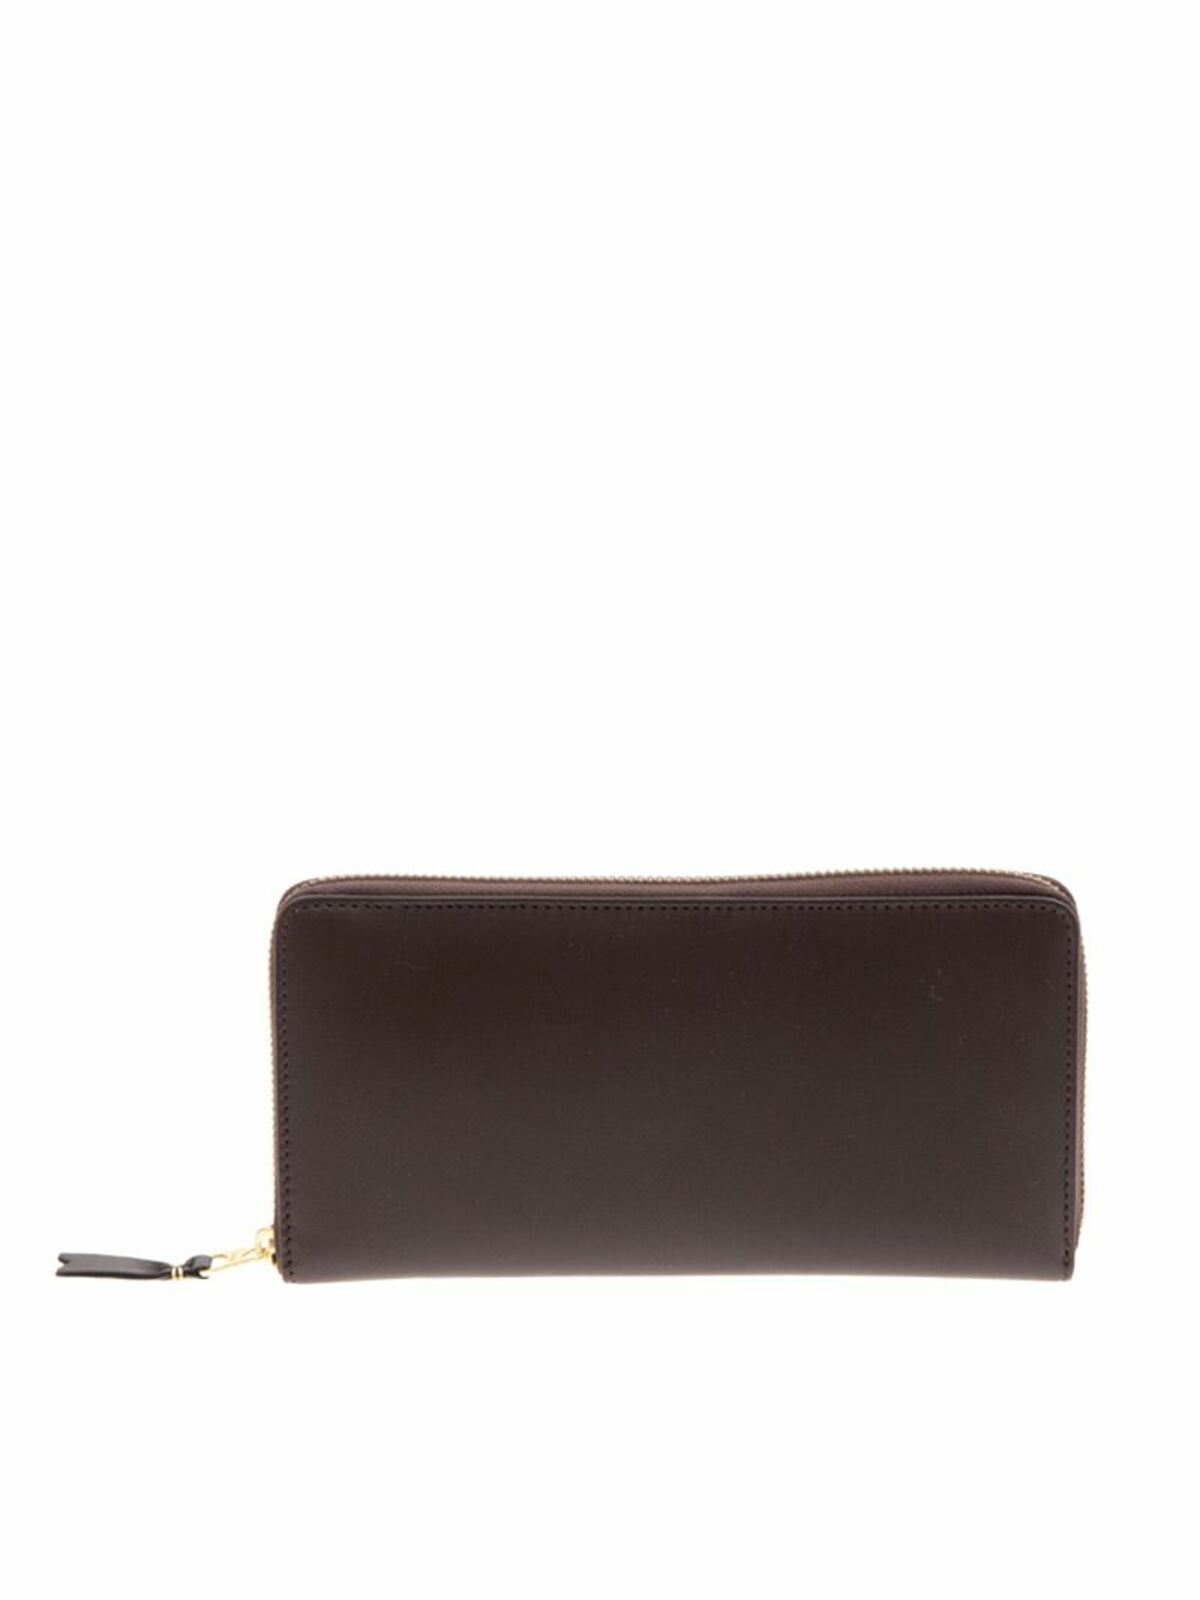 Comme Des Garçons Classic Leather Wallet In Brown In Marrón